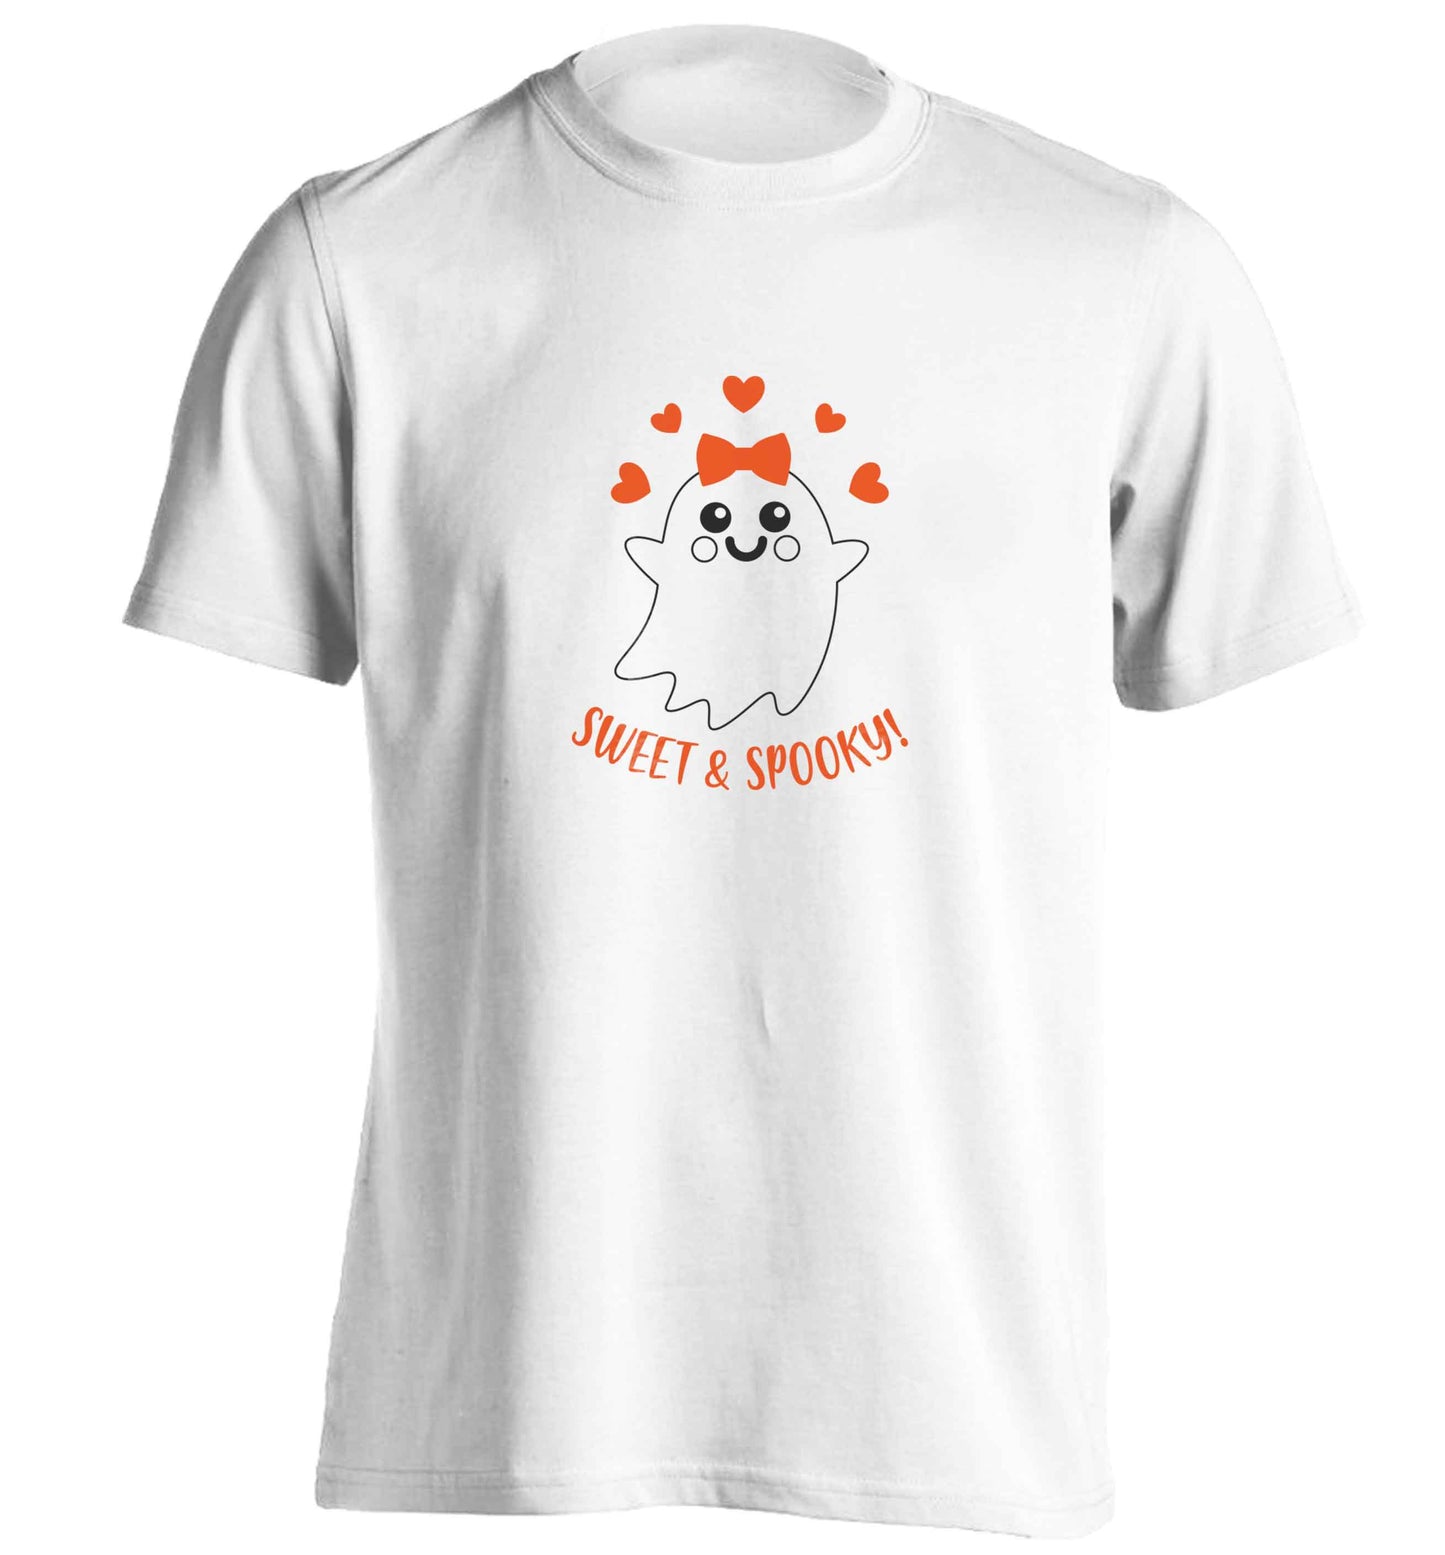 Sweet and spooky adults unisex white Tshirt 2XL